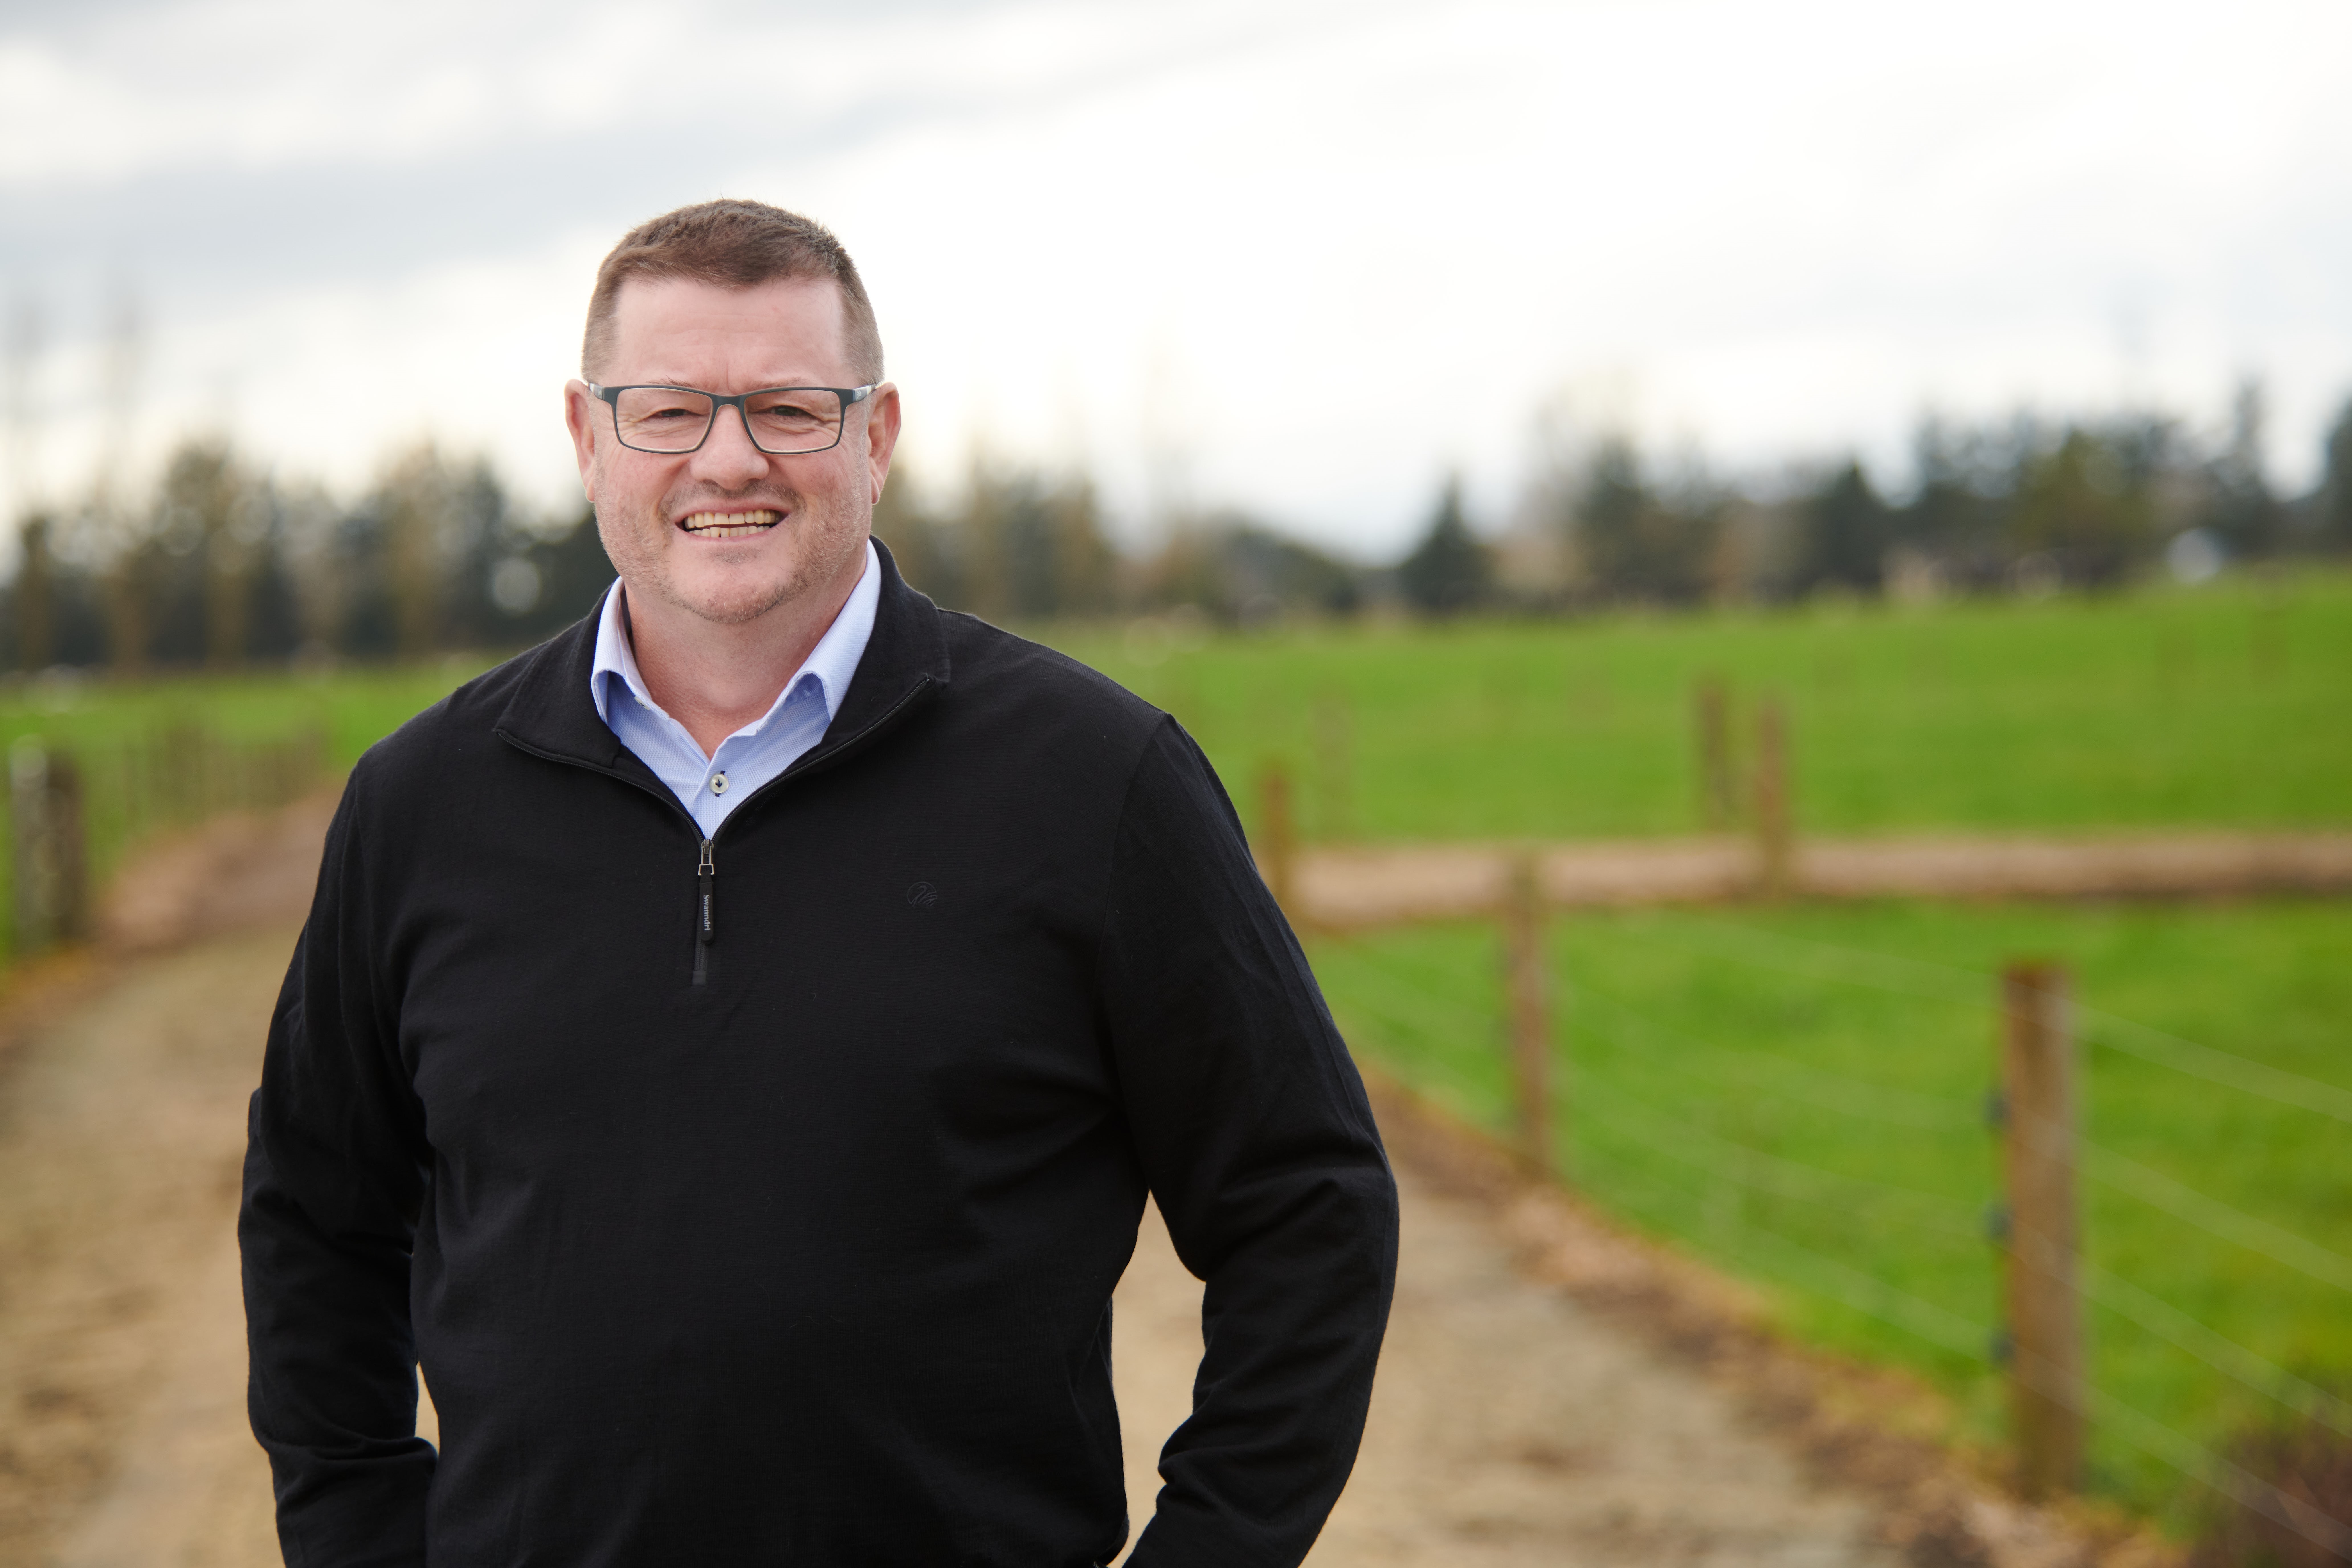 Value for farmers is focus of new DairyNZ CEO